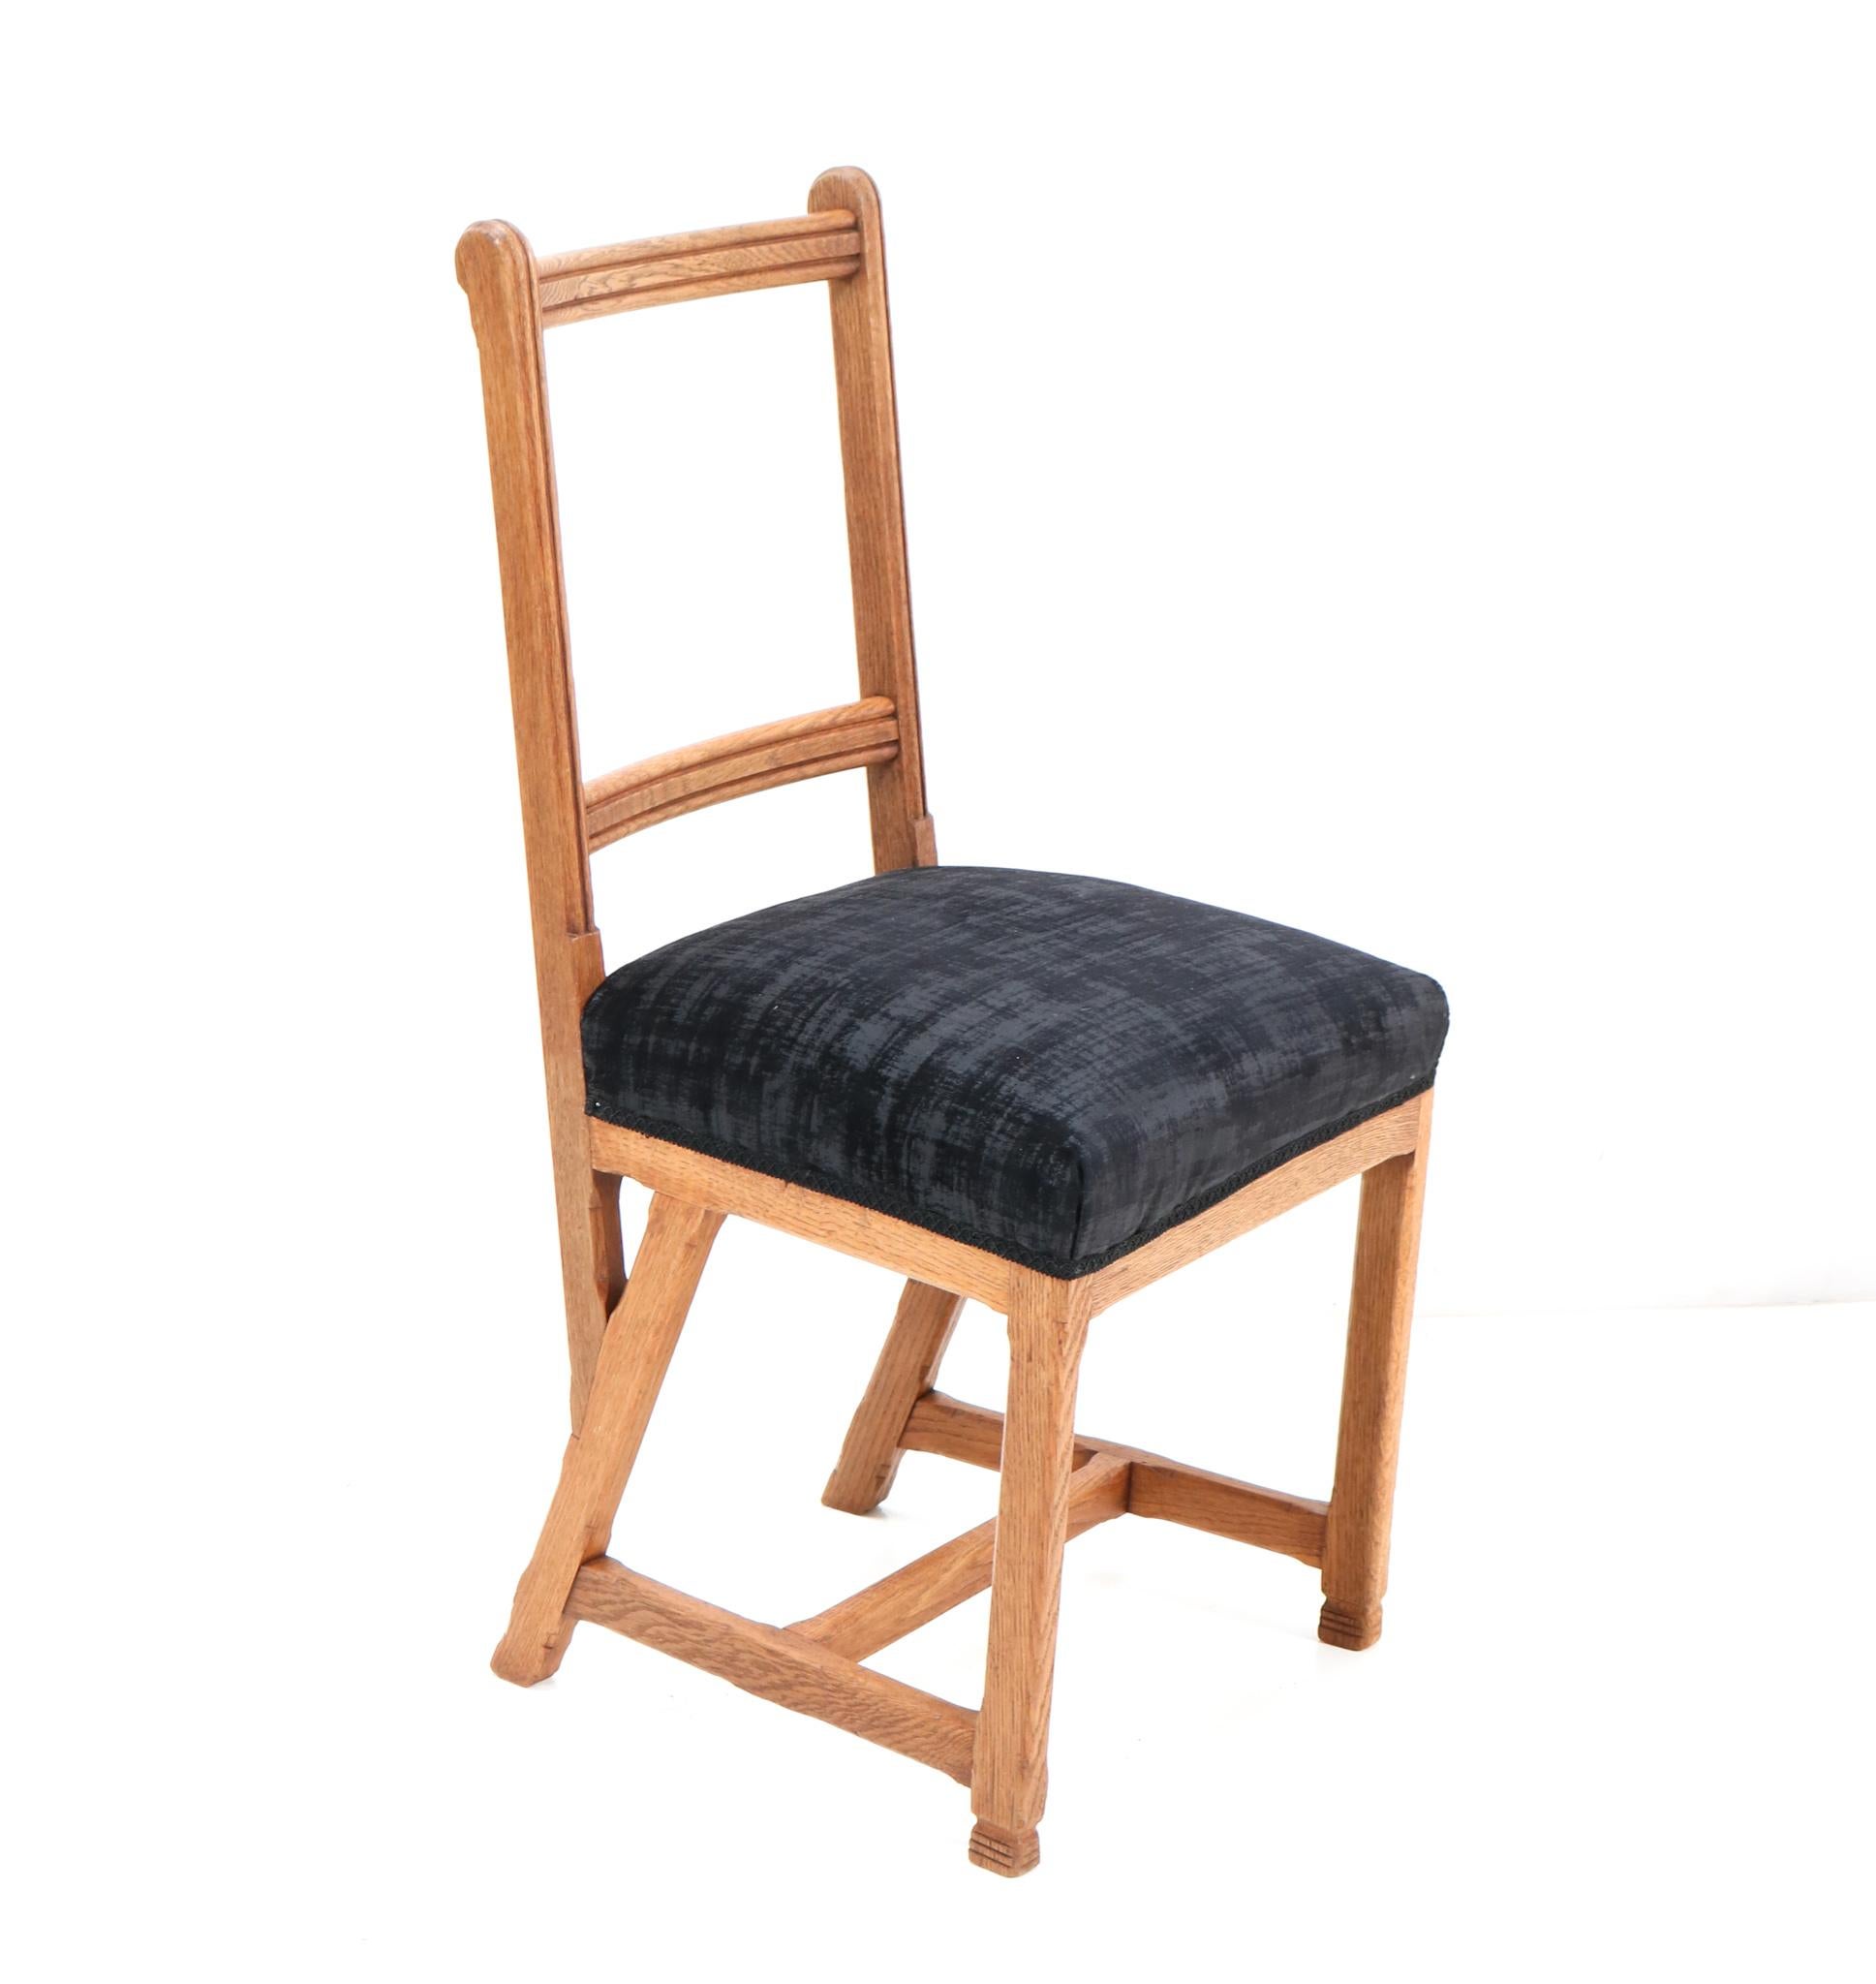 Twelve Oak Arts & Crafts Chairs by Hendrik Petrus for the University of Leiden For Sale 5